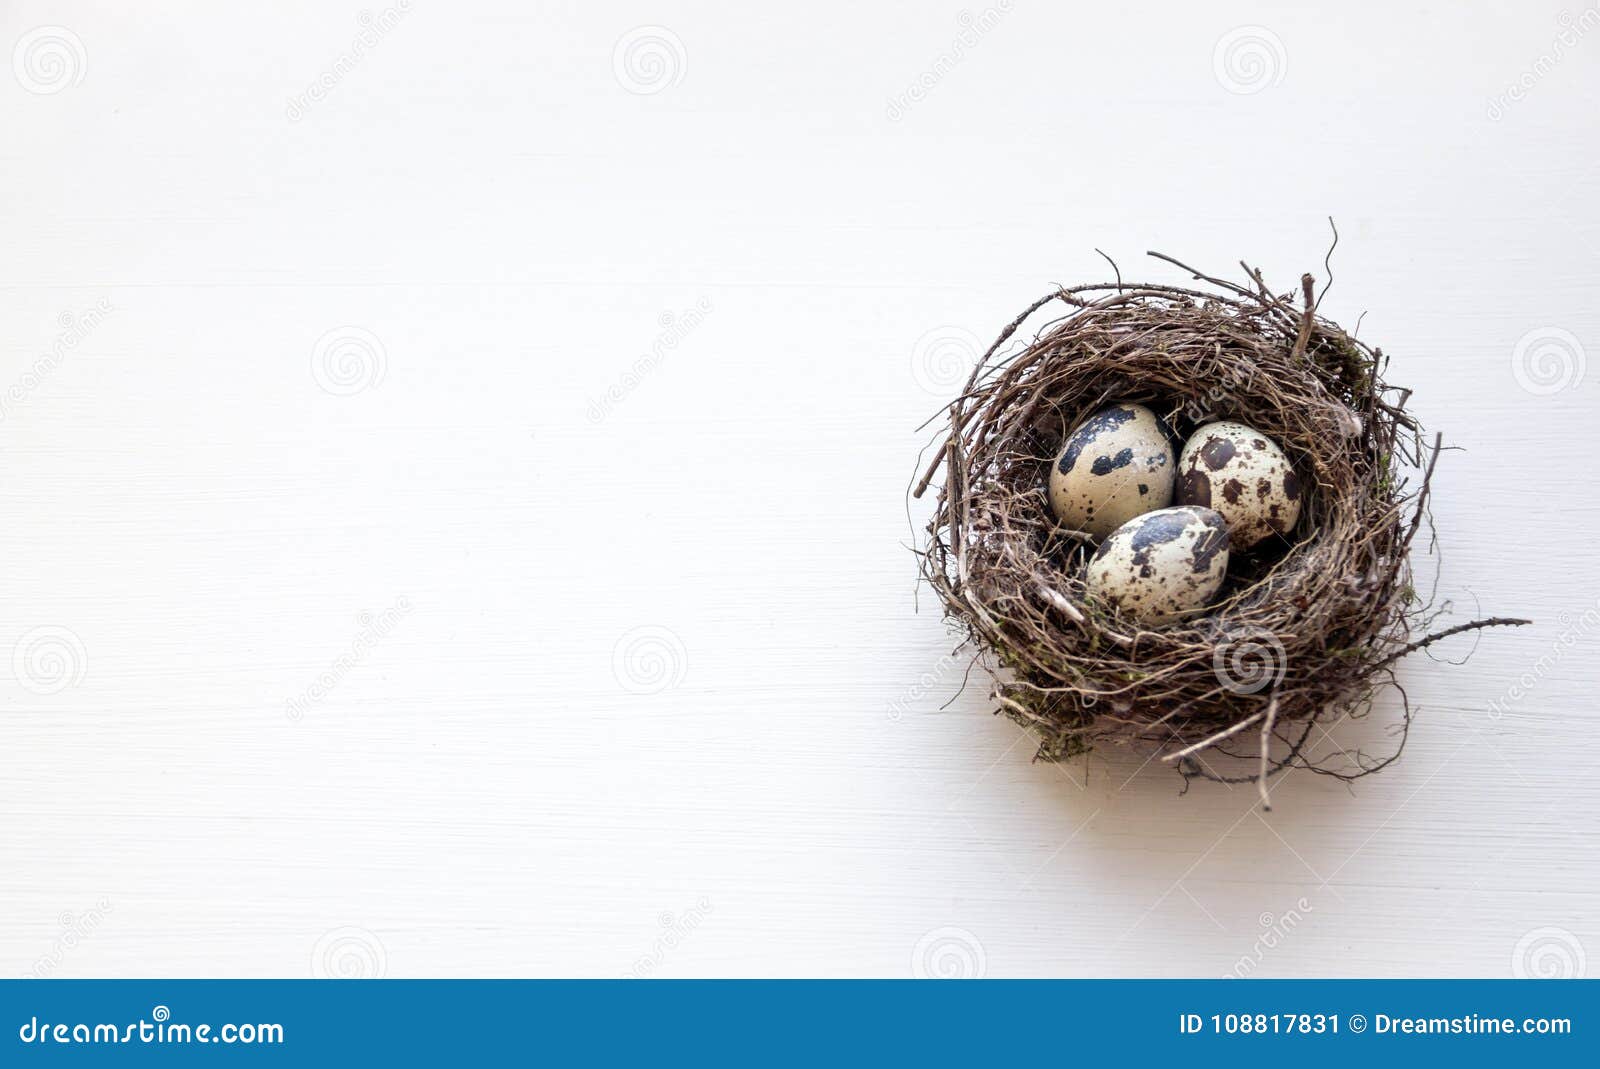 a nest with three quail eggs on a business table